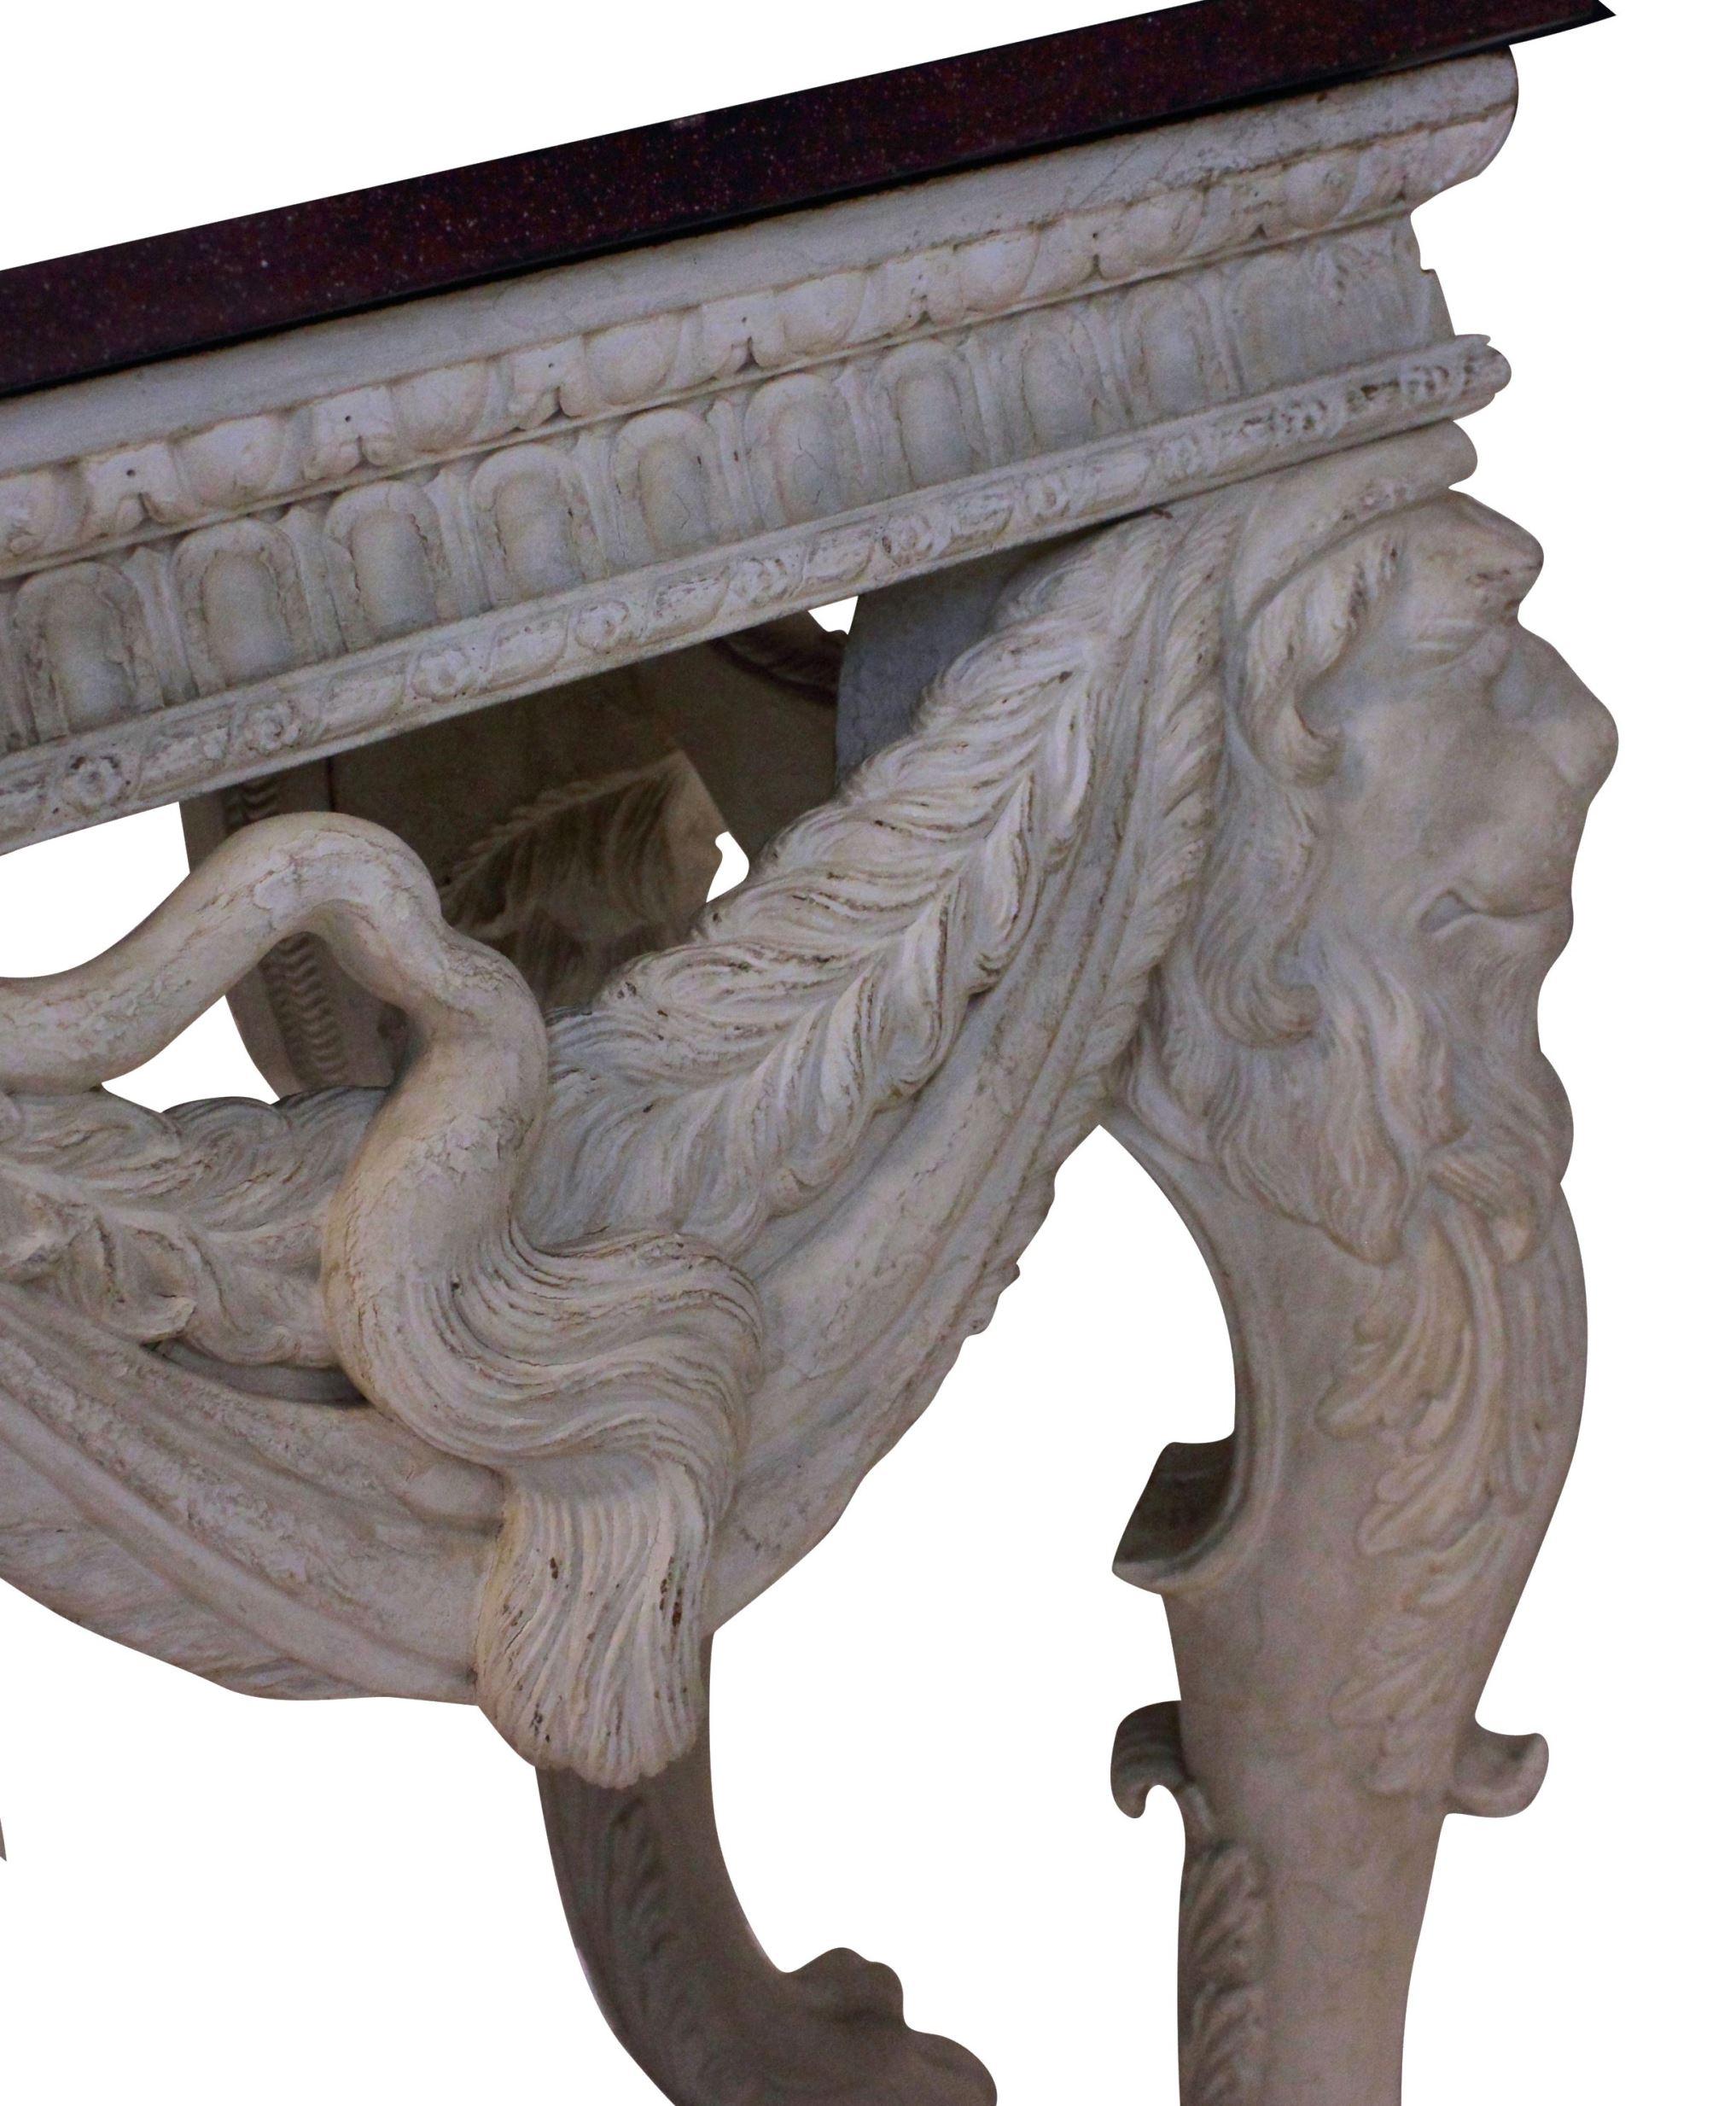 Early 20th Century English Carved and Painted Mahogany Console Table with a Solid Porphyry Top